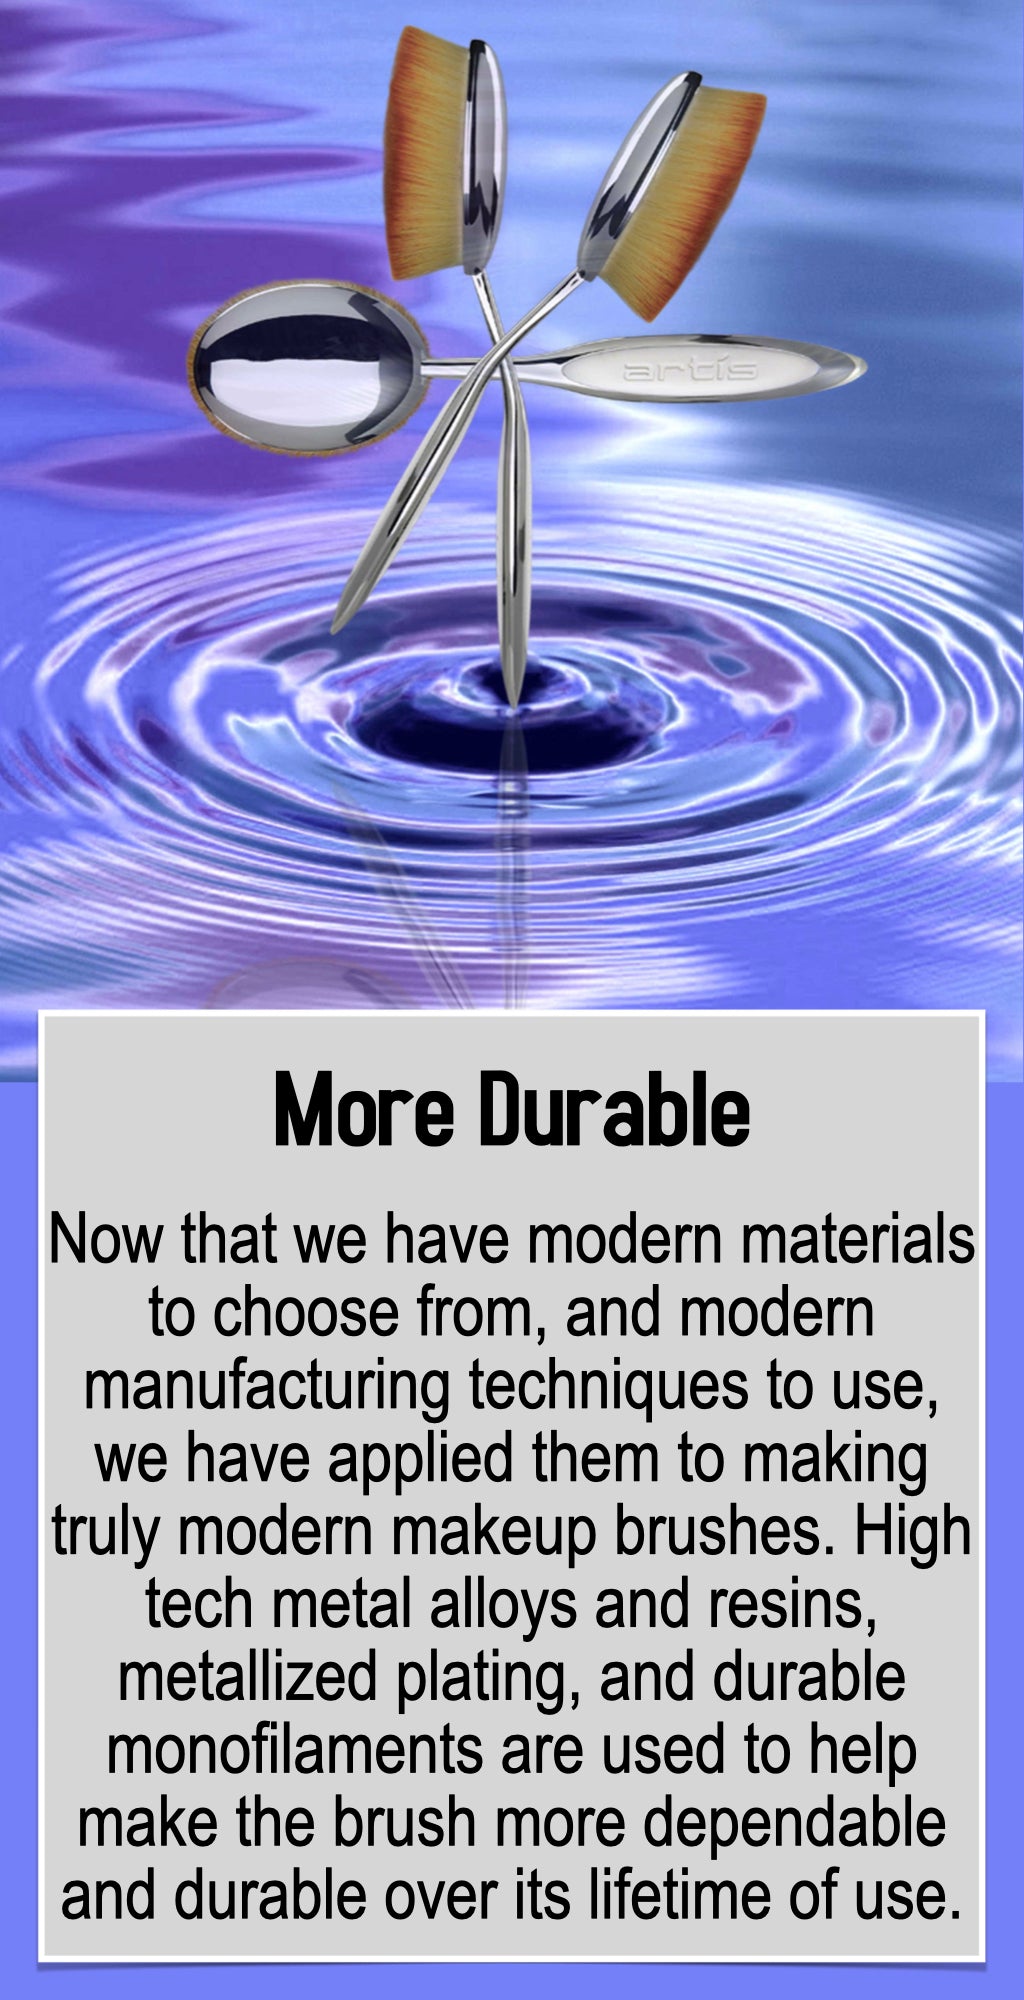 Now that we have modern materials to choose from, and modern manufacturing techniques to use, we have applied them to making truly modern makeup brushes. High tech metal alloys and resins, metallized plating, and durable monofilaments are used to help make the brush more dependable and durable over its lifetime of use.